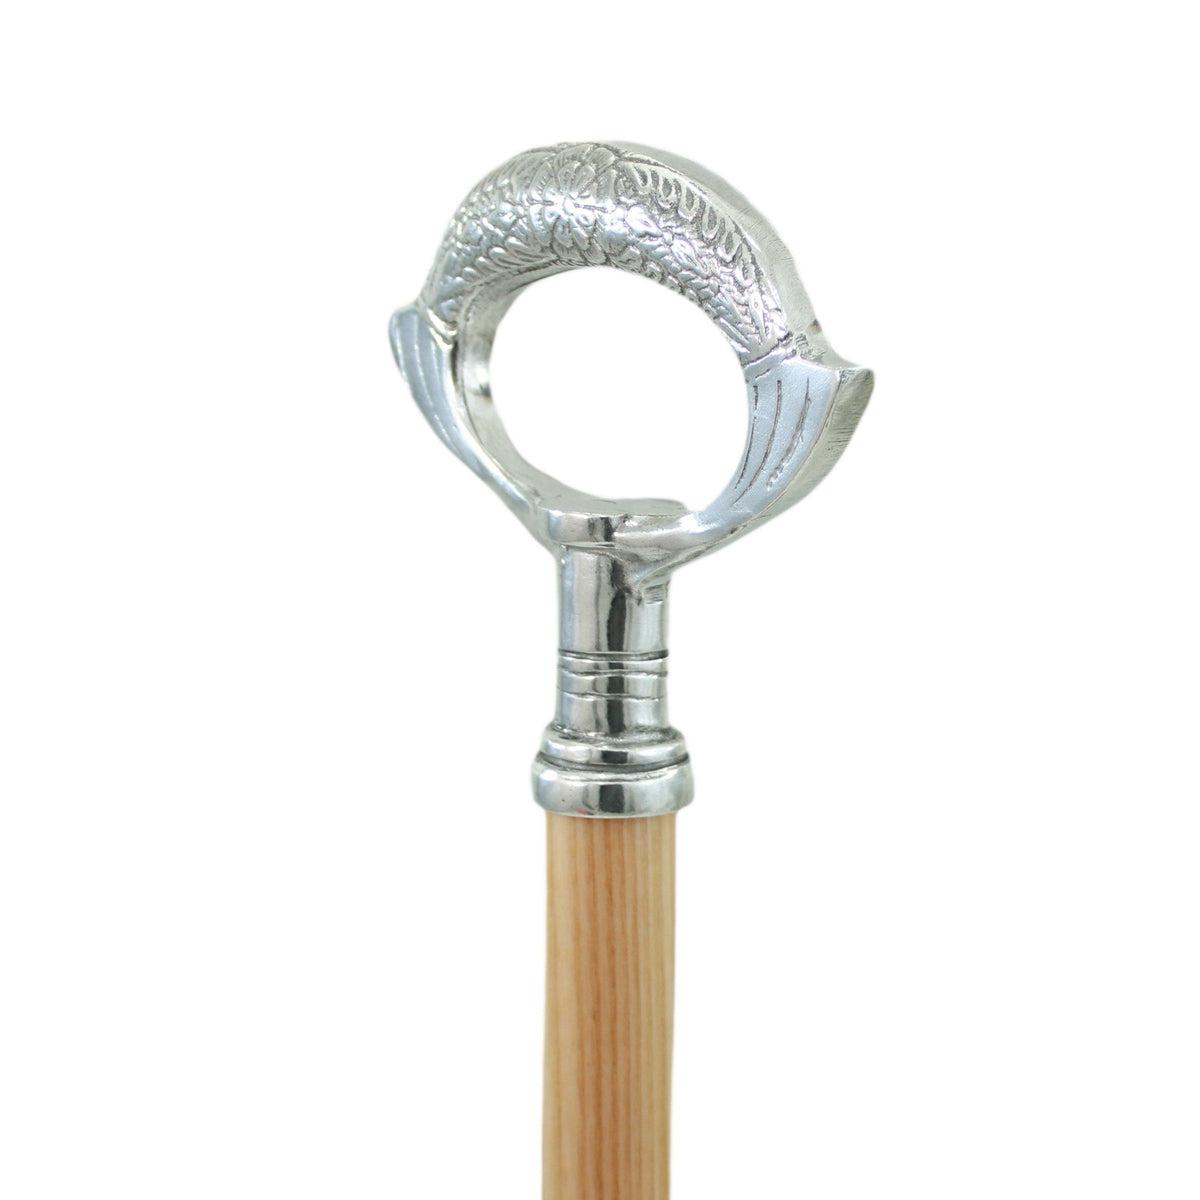 Custom Made Unique Hand Grip Solid Pewter Walking Cane